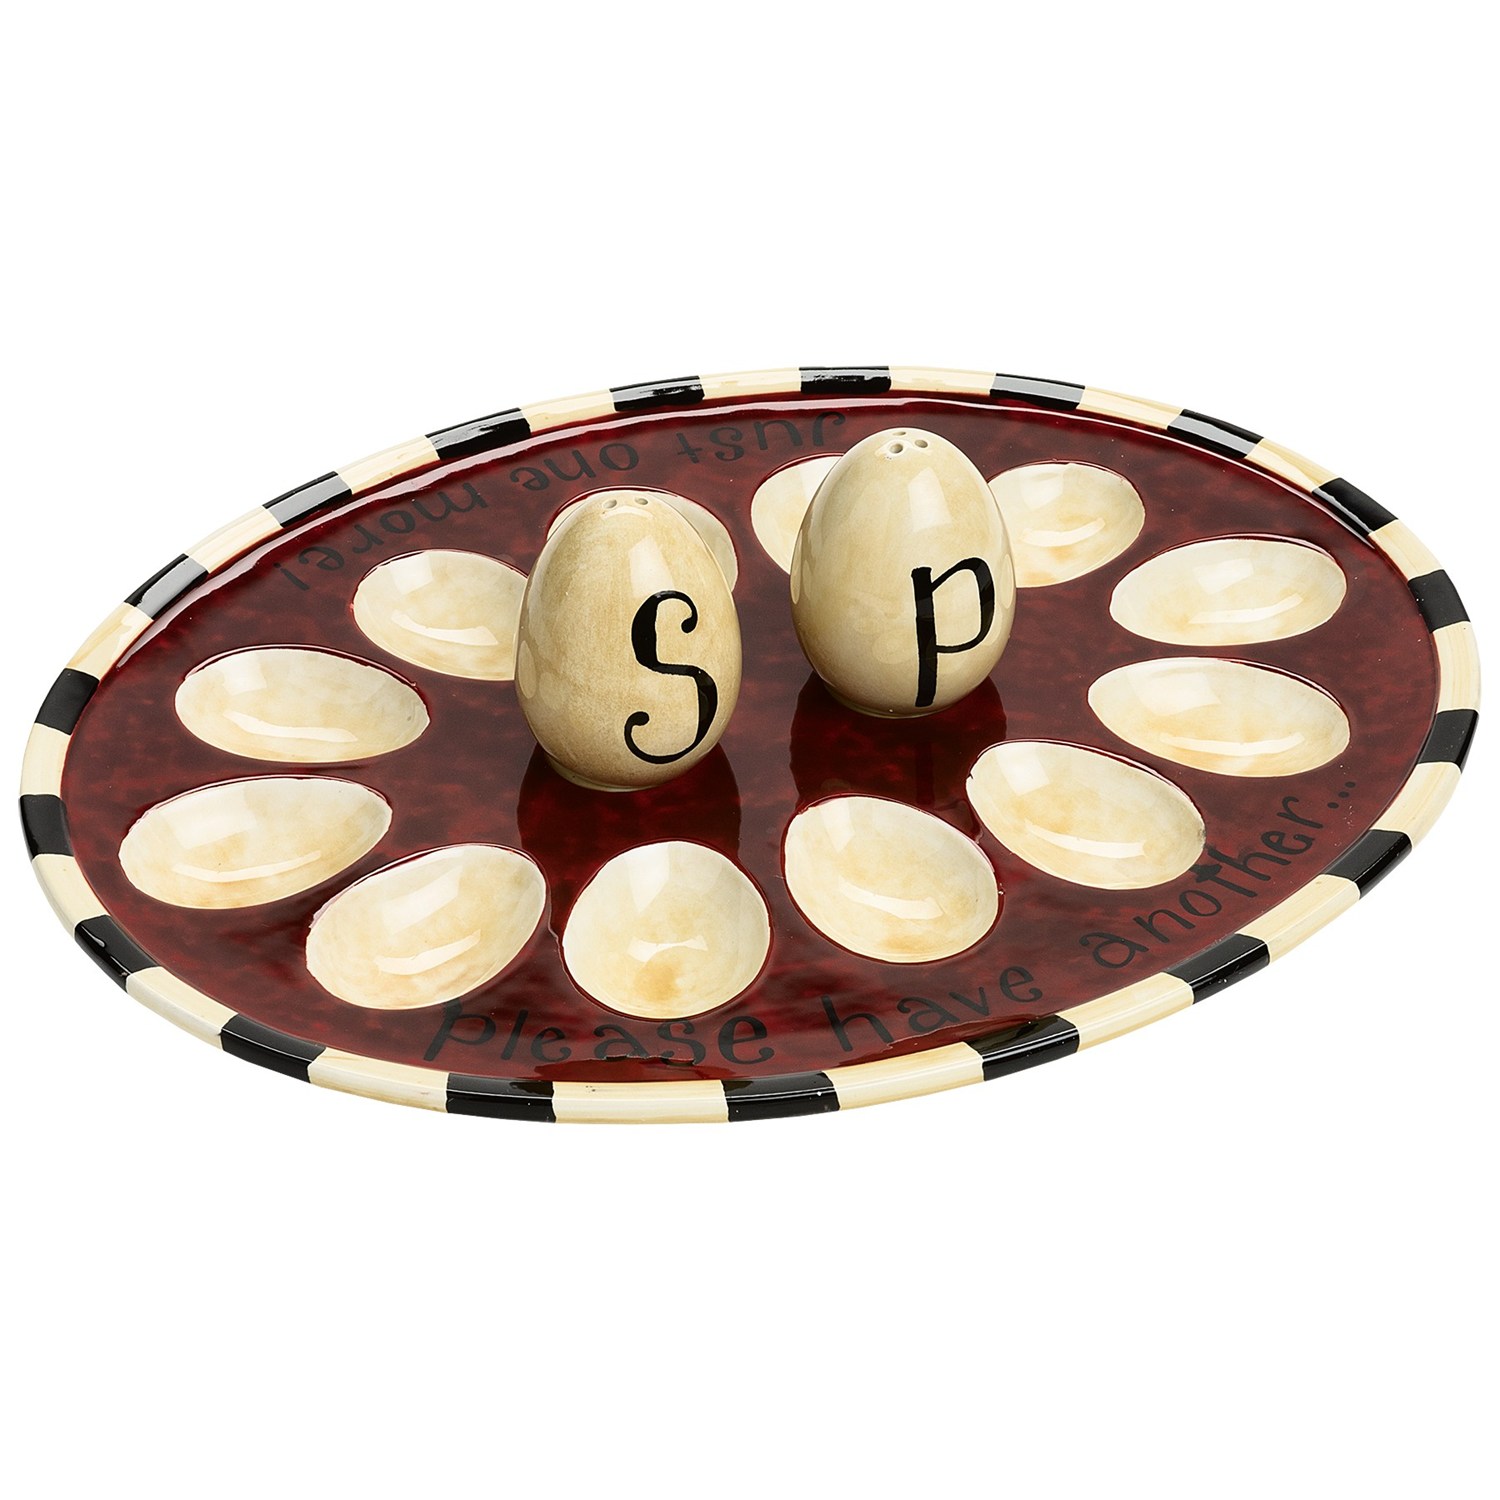 Certified International Deviled Egg Plate with Salt and Pepper ...